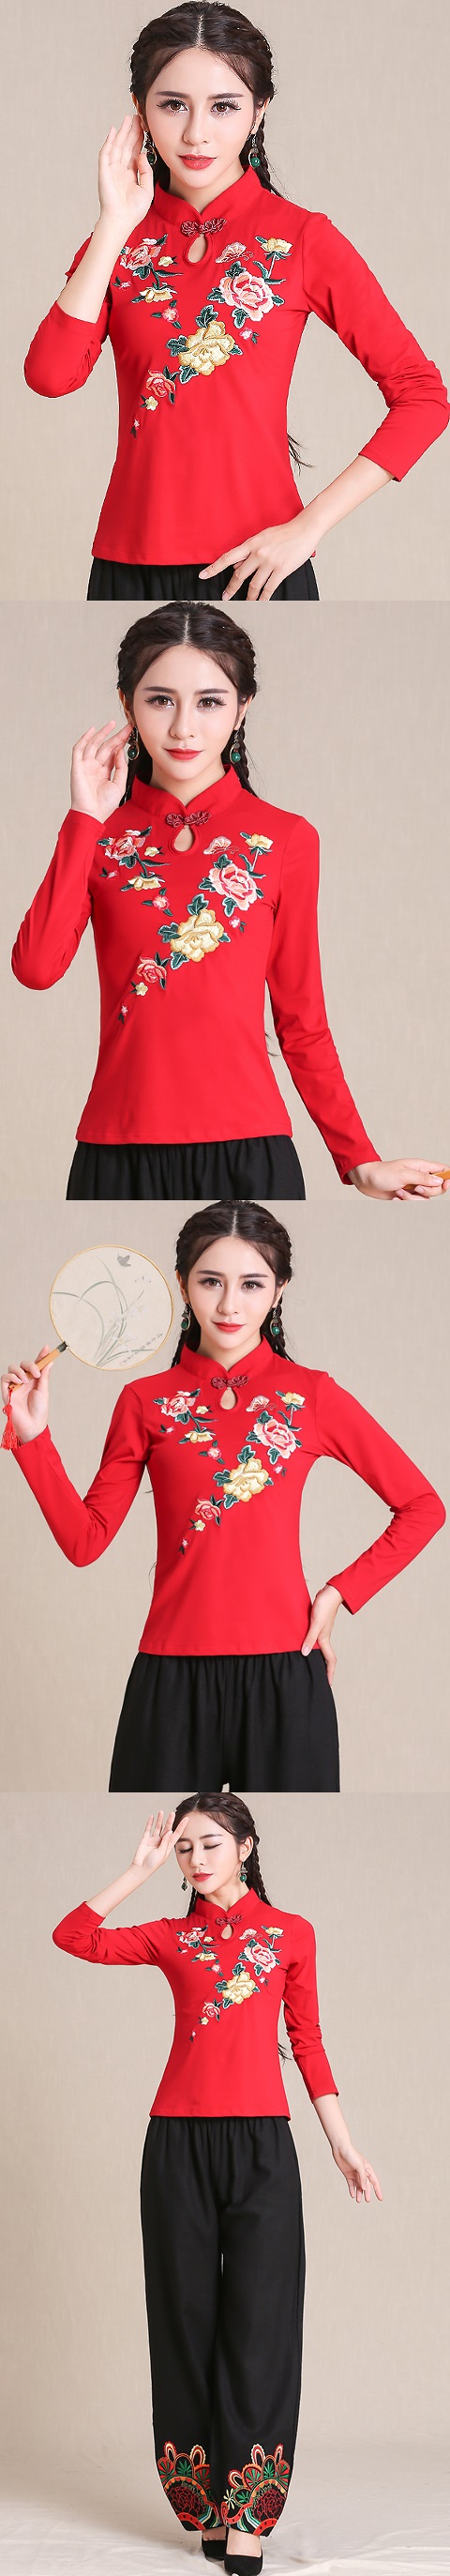 Ethnic Floral Embroidery Long-sleeve Blouse - Red (RM)